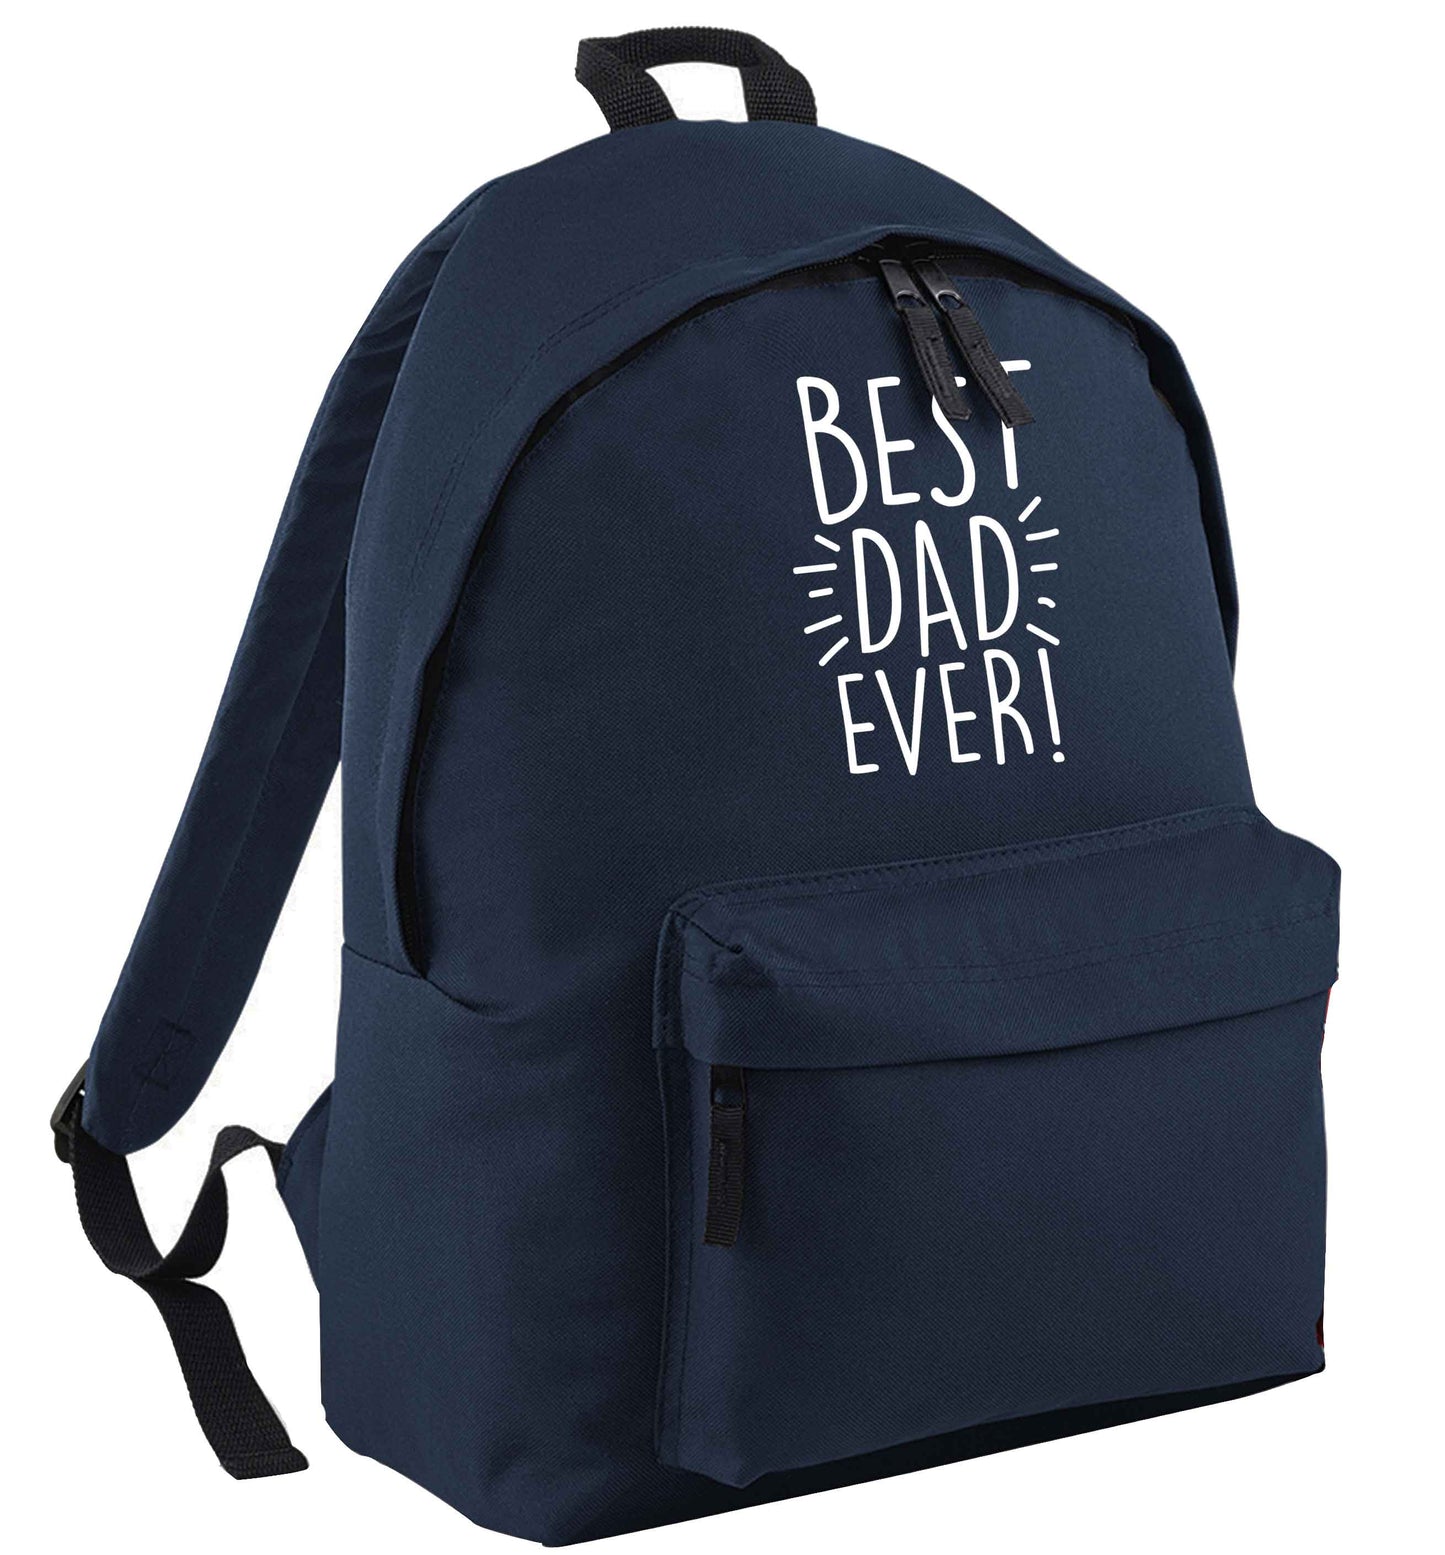 Best dad ever! navy adults backpack